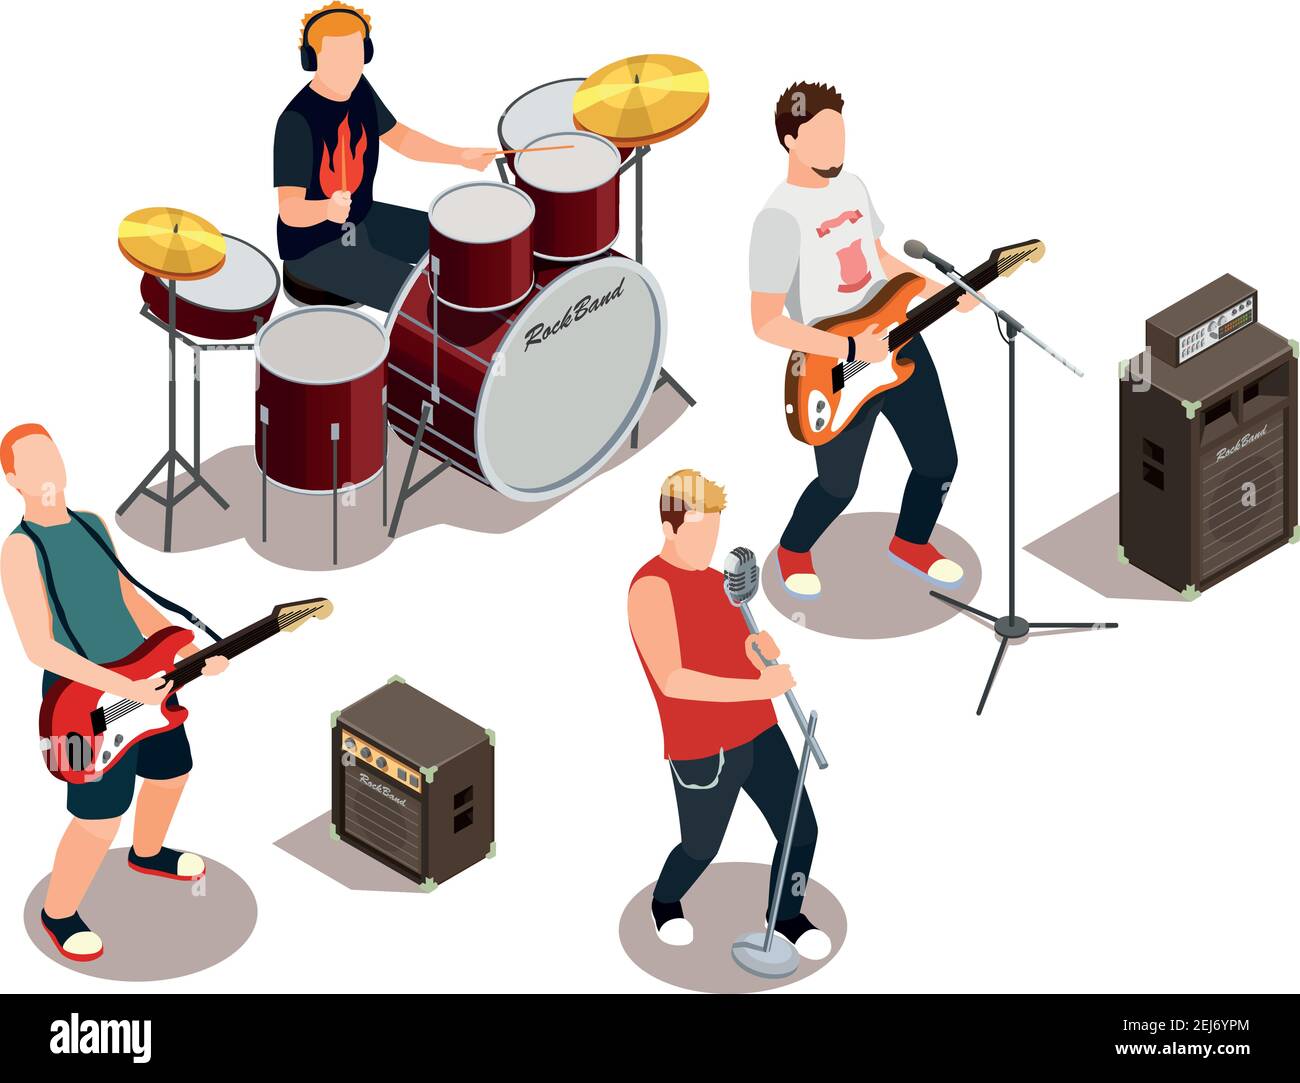 Rock band instruments Cut Out Stock Images & Pictures - Alamy